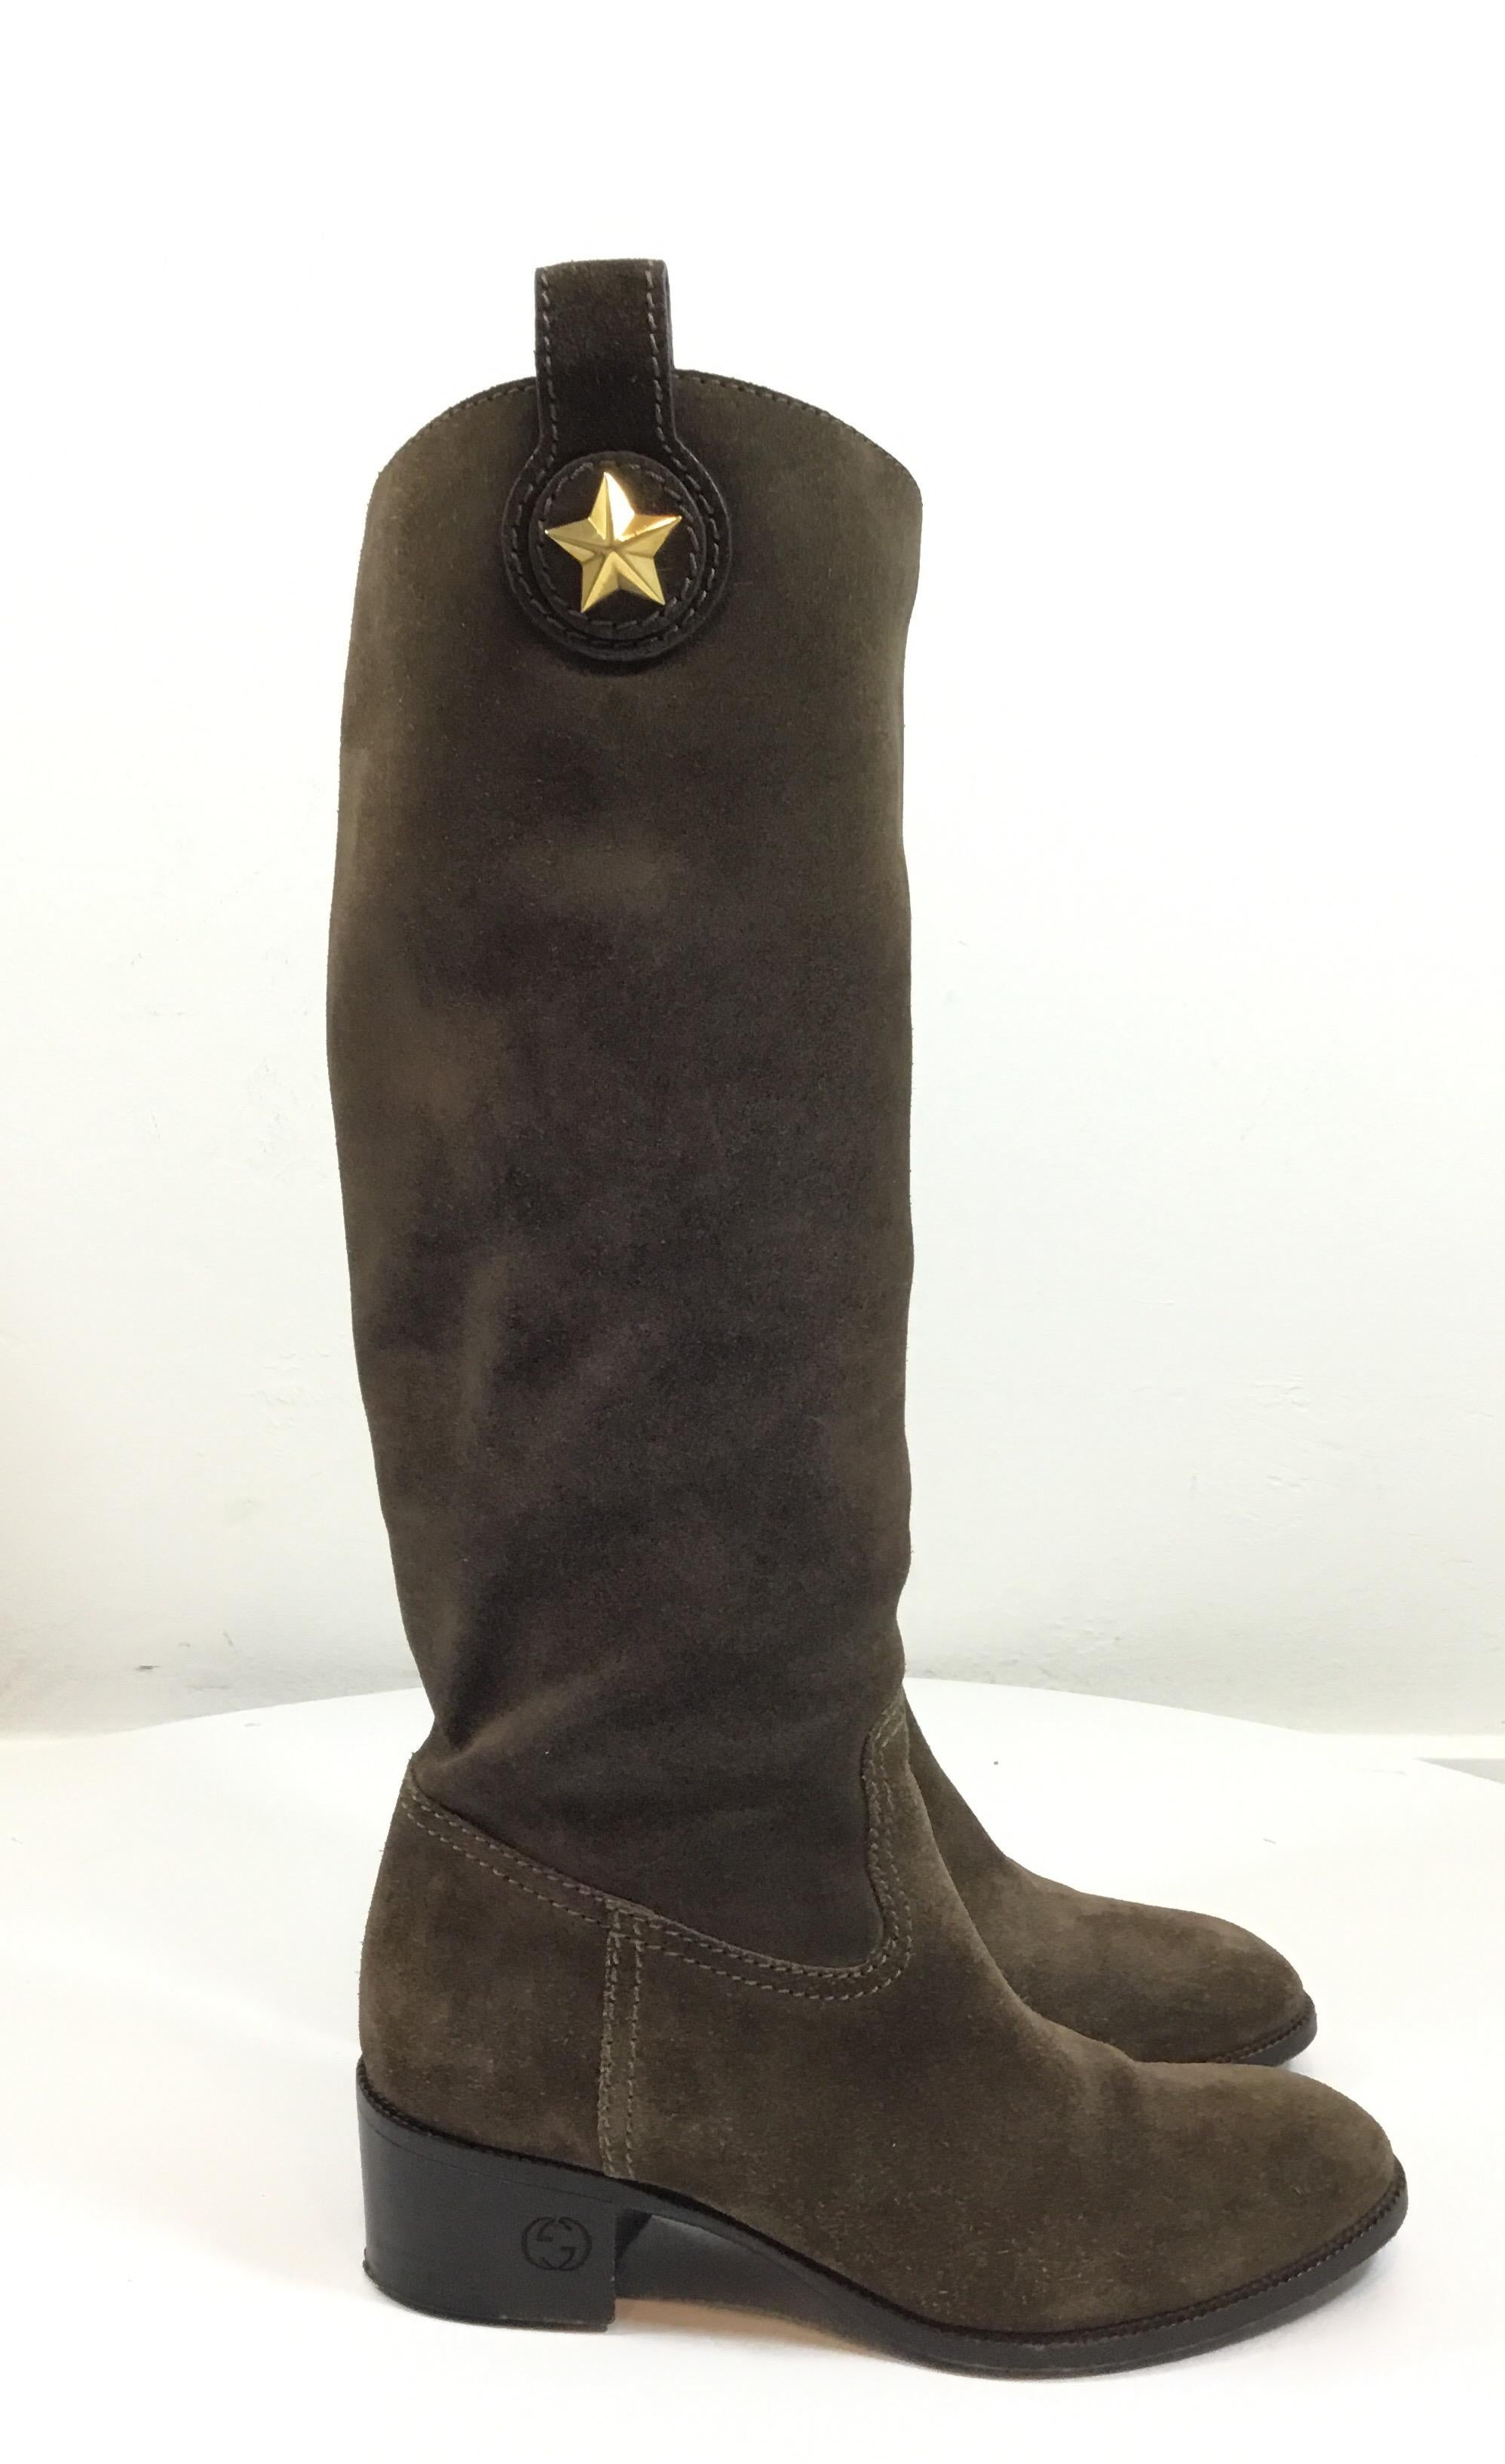 Gucci Suede Brown Boots w/ Gold Star Detail featured in Size 6. Excellent condition. Normal light wear to suede.

Height from top of heel to top of boot 14 in

Heel height 1 3/4 in

Calf opening 14 1/2 in